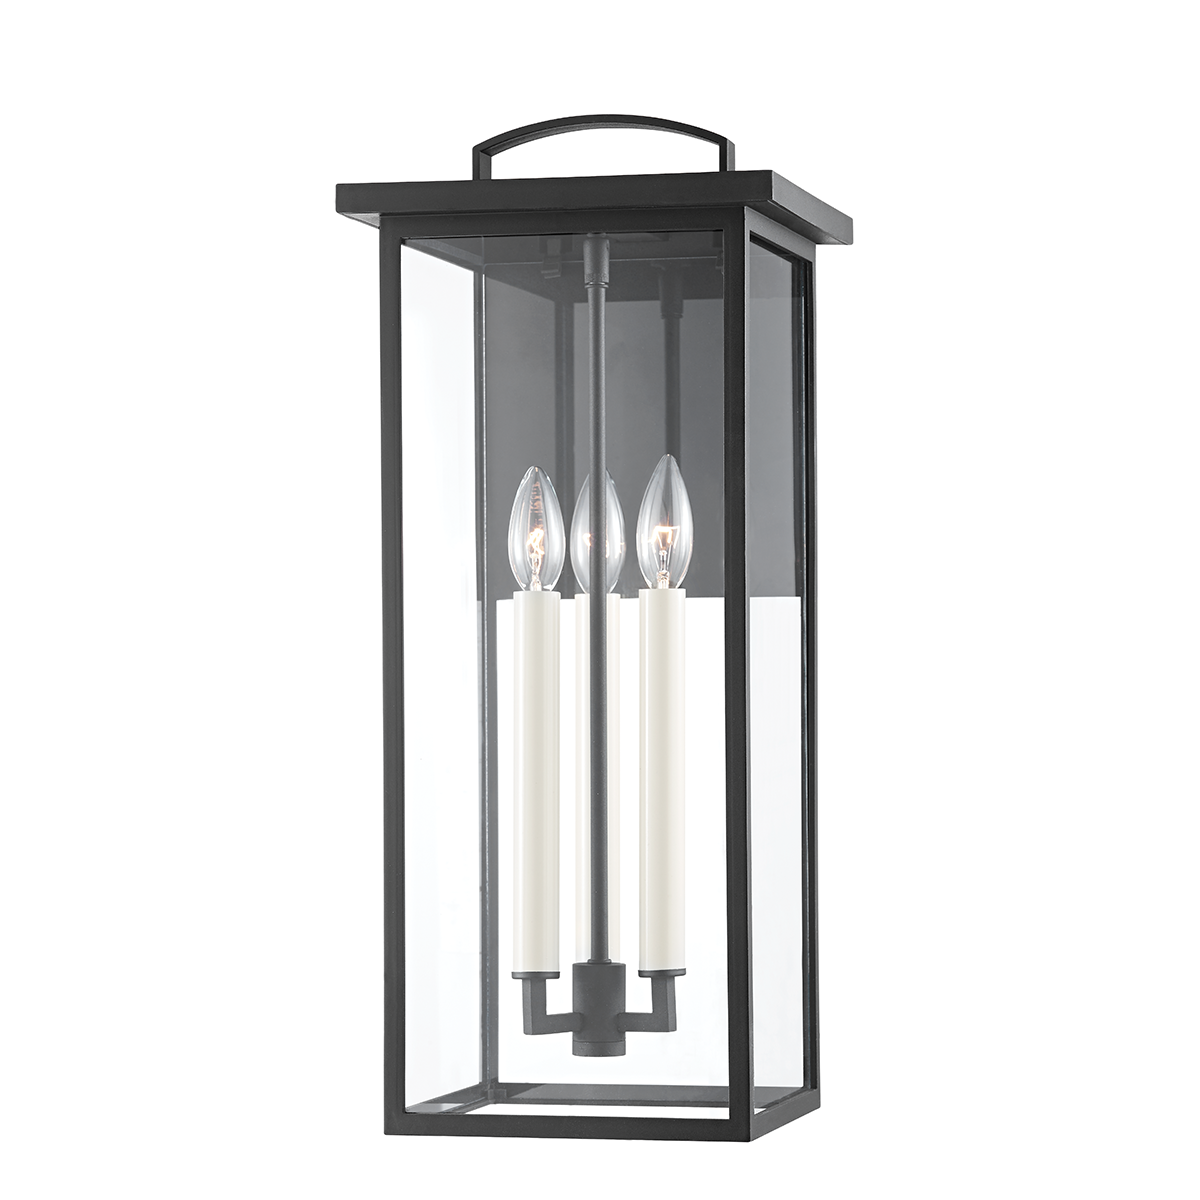 Troy Lighting 3 LIGHT LARGE EXTERIOR WALL SCONCE B7523 Outdoor l Wall Troy Lighting TEXTURE BLACK  